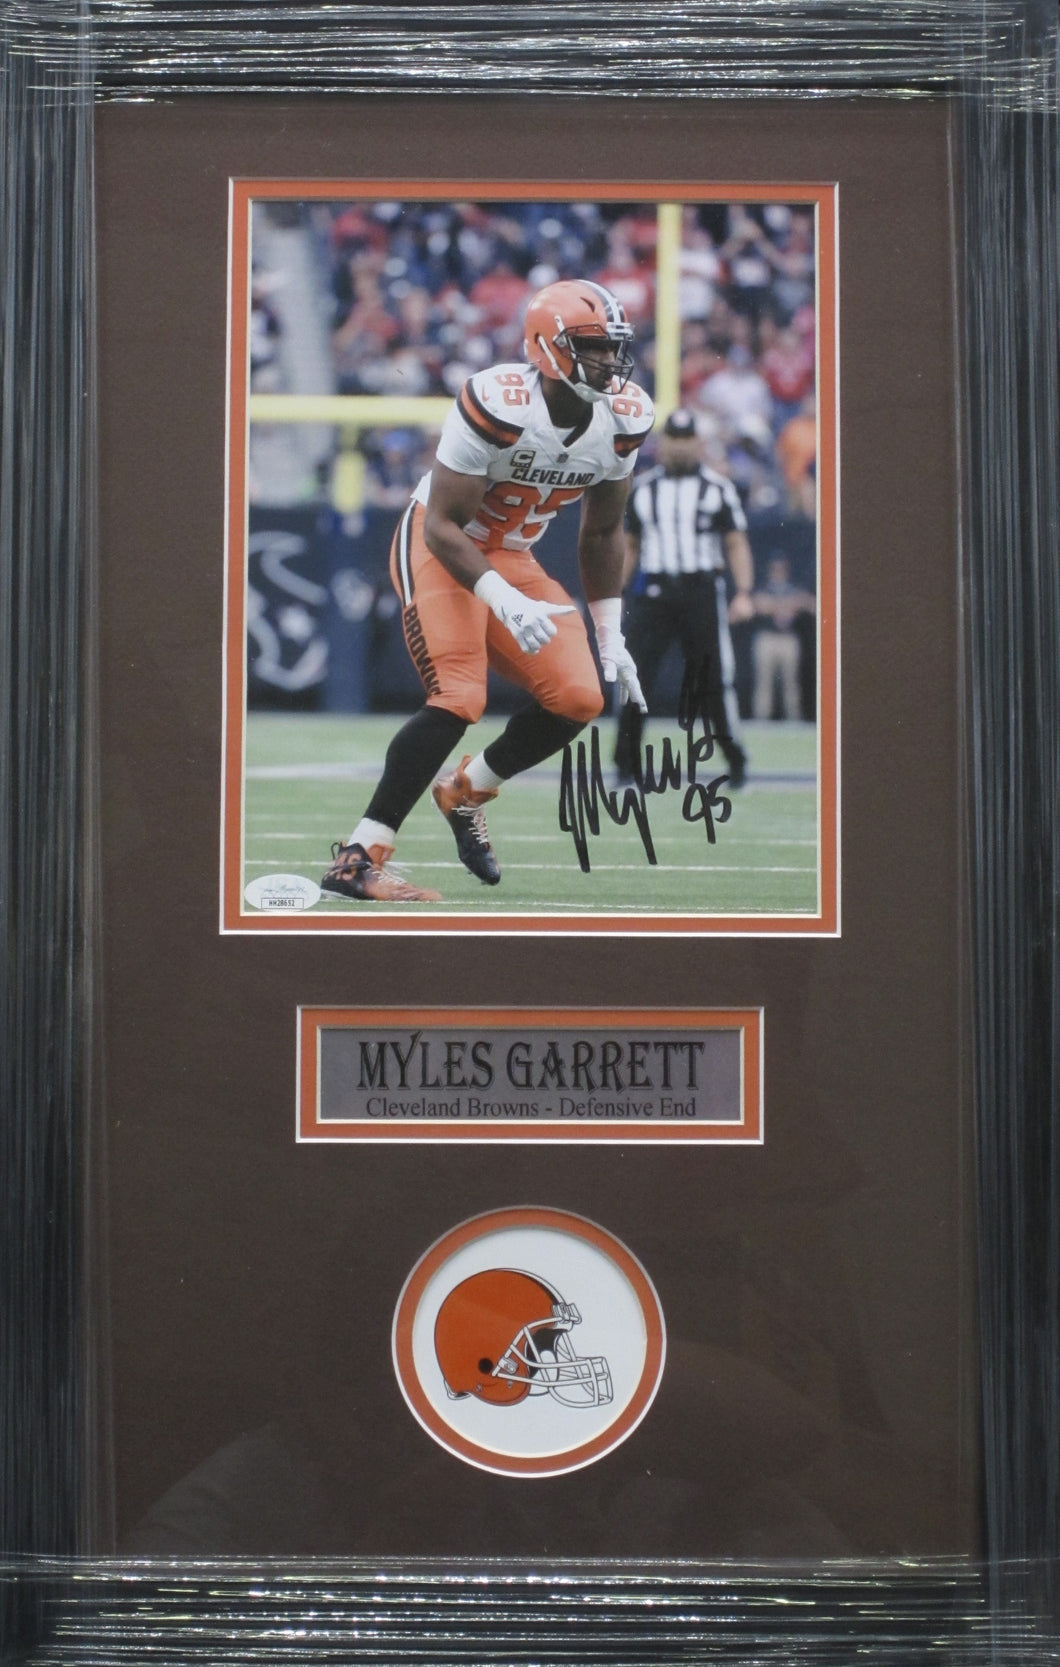 Cleveland Browns Myles Garrett Signed 8x10 Photo Framed & Matted with JSA COA